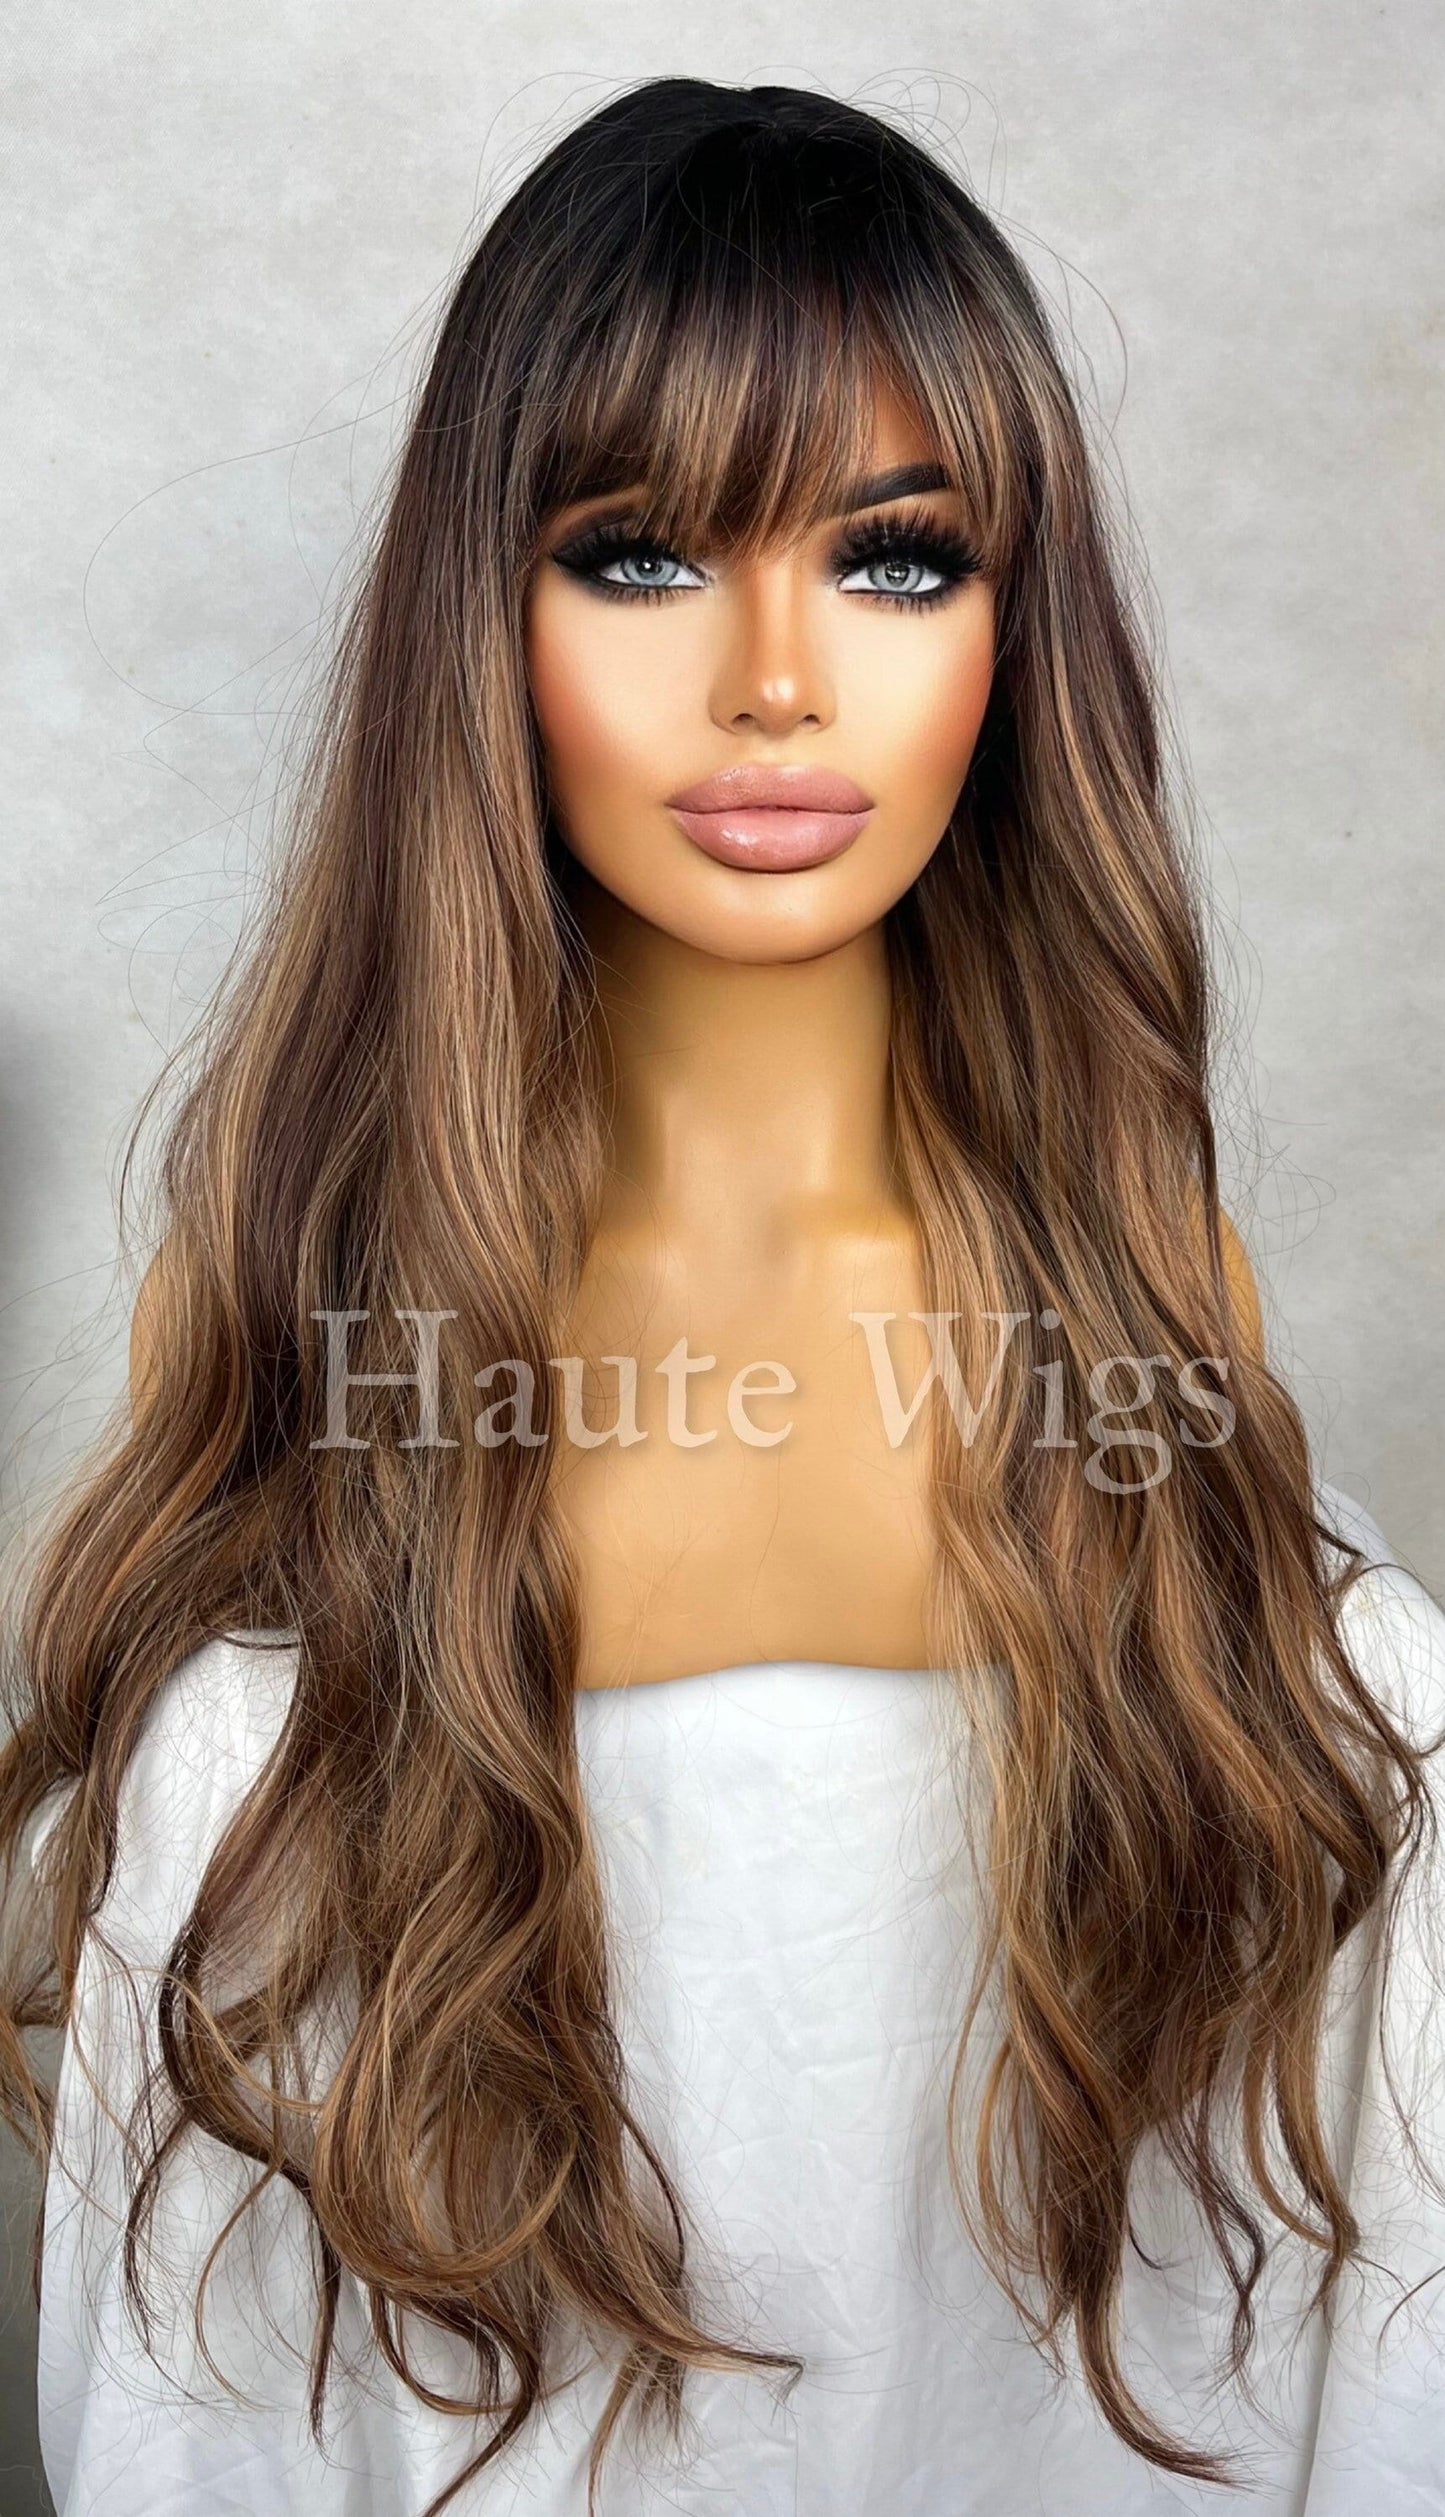 Shangri-La - 30 Inch Long Brunette Brown With Highlights Streaks Wig Hair Fringe Bangs Wavy Gift For Her Role Play Haute Wigs Women